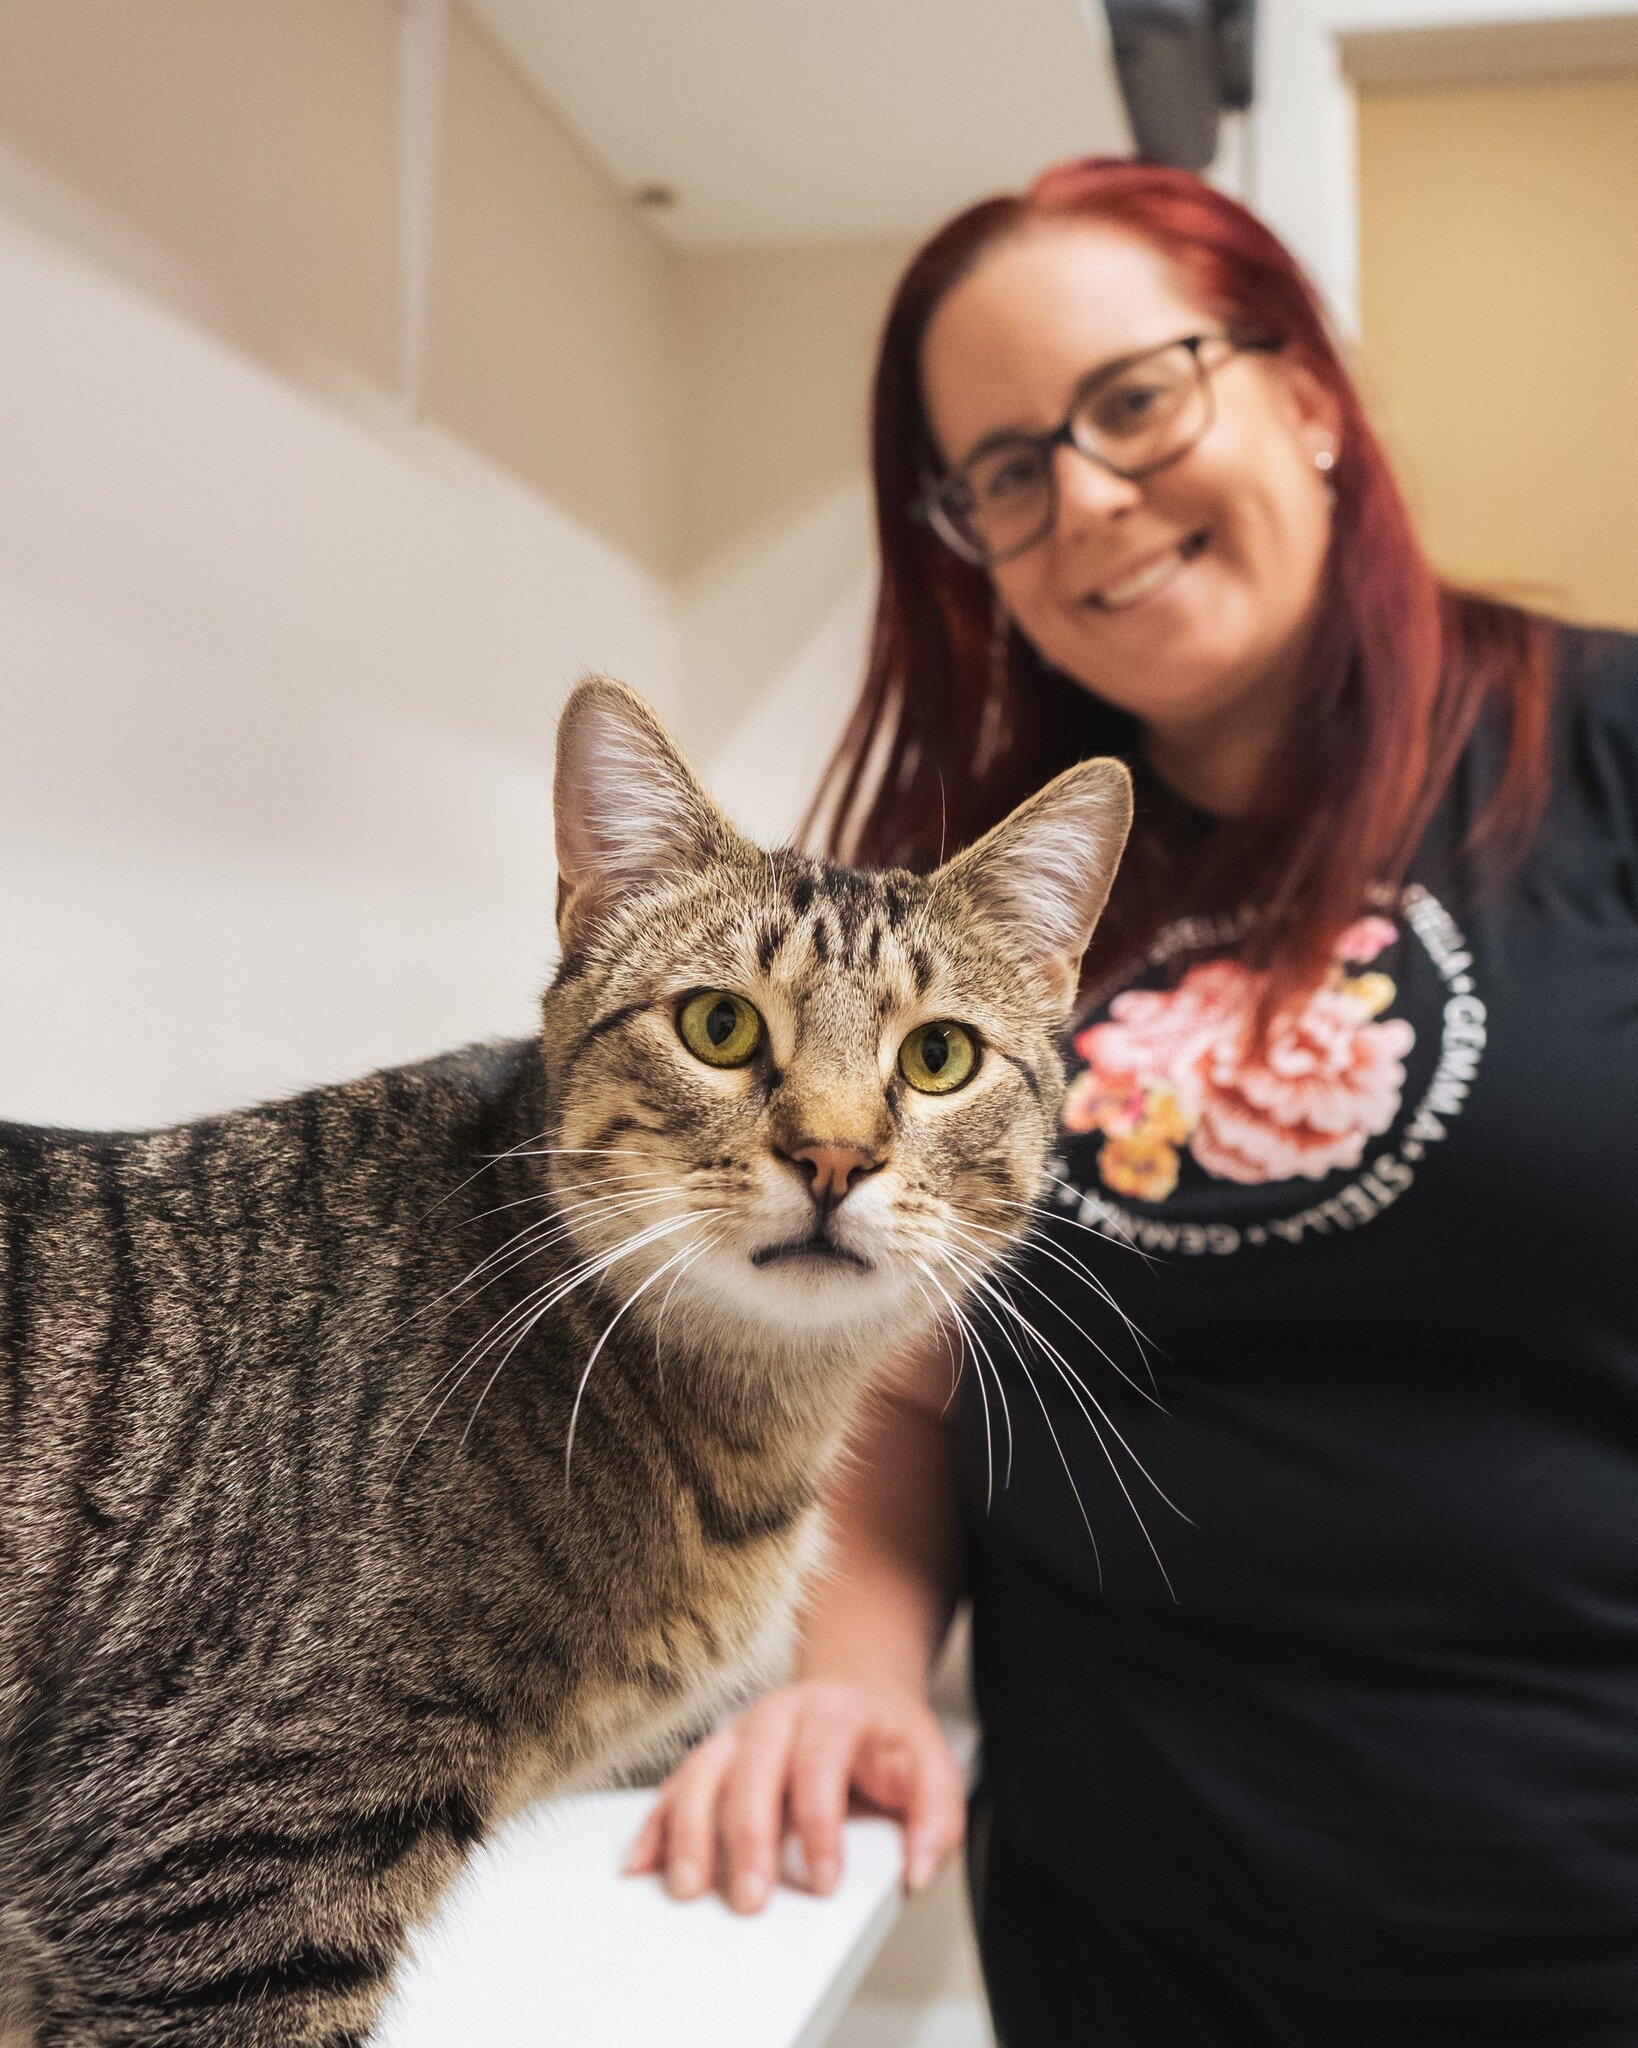 Richie has been adopted! 🐈🏡

Richie went to his new home a couple of weeks ago and he is settling in well. We were stoked to have found Richie the perfect home as he was feeling a bit overwhelmed by all the other cats at the cafe. 

Richie came to 